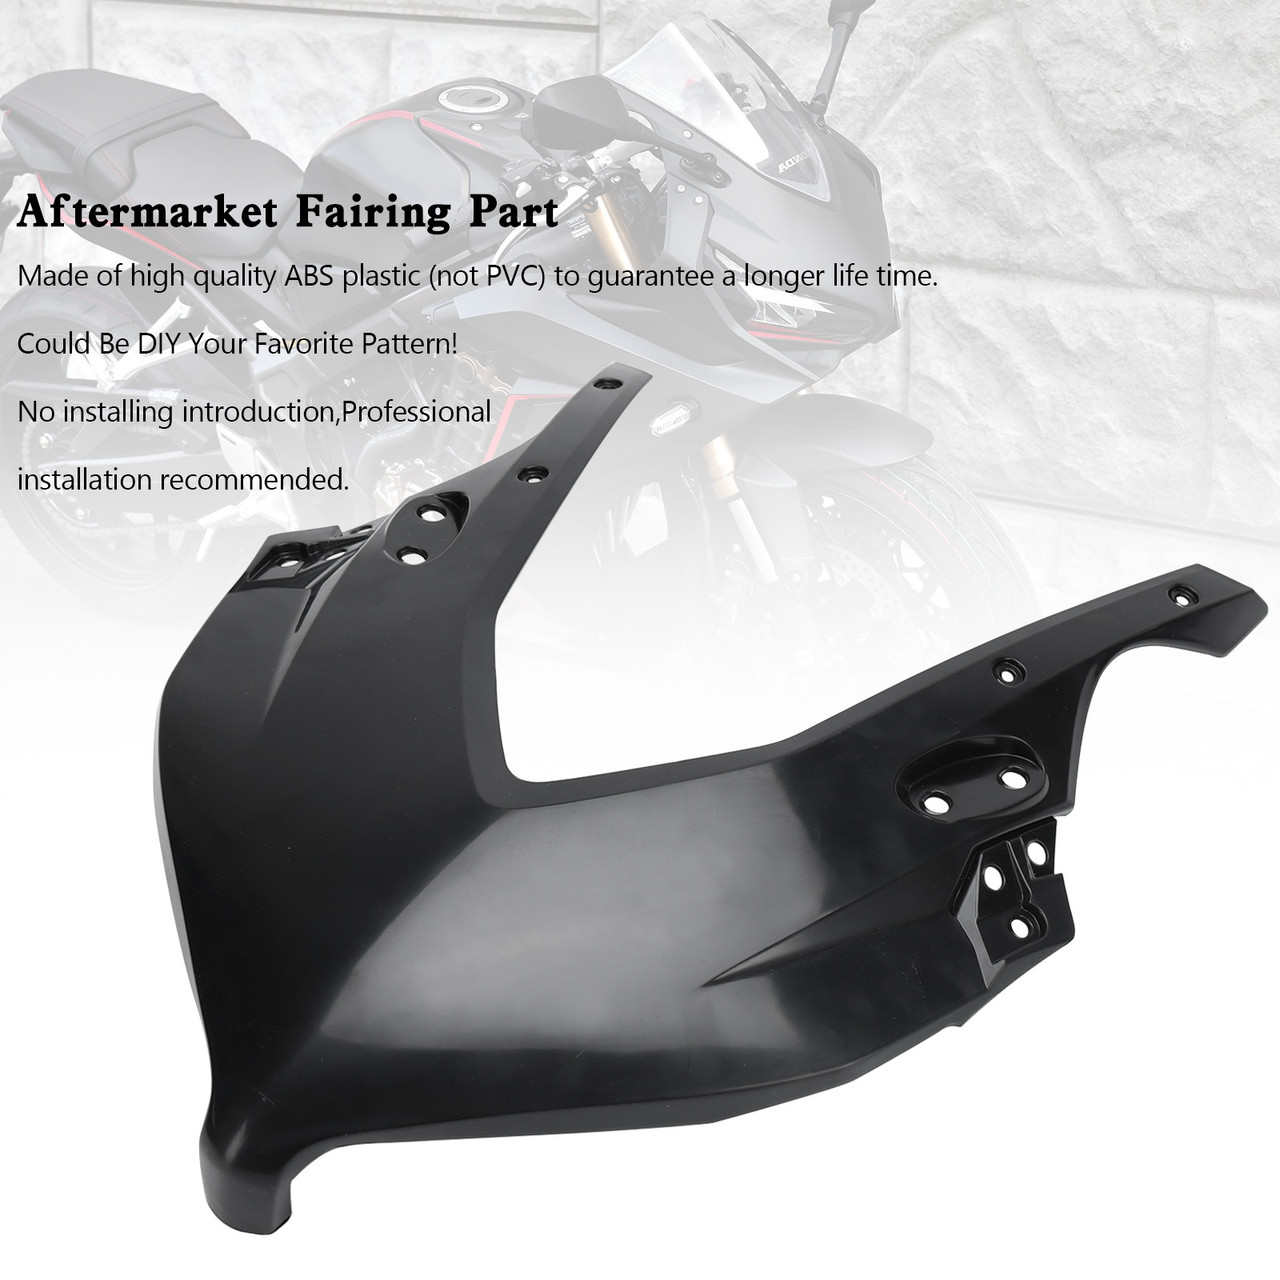 Unpainted ABS Front Headlight Nose Cover Protector for Honda CBR650R 2019-2023